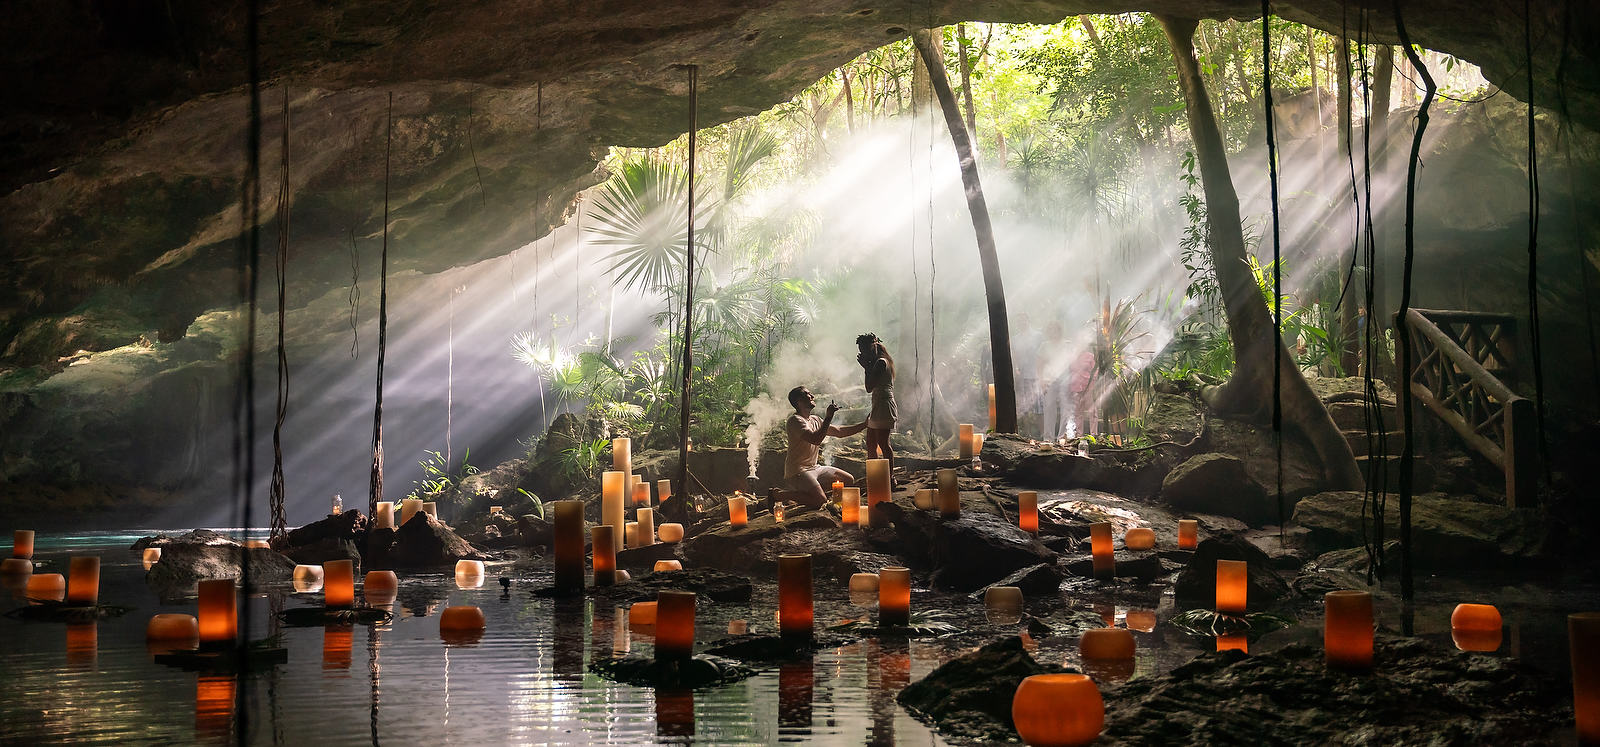 Proposal ideas in Mexico proposing in a cenote with candles and beautiful lighting in a smoke cave